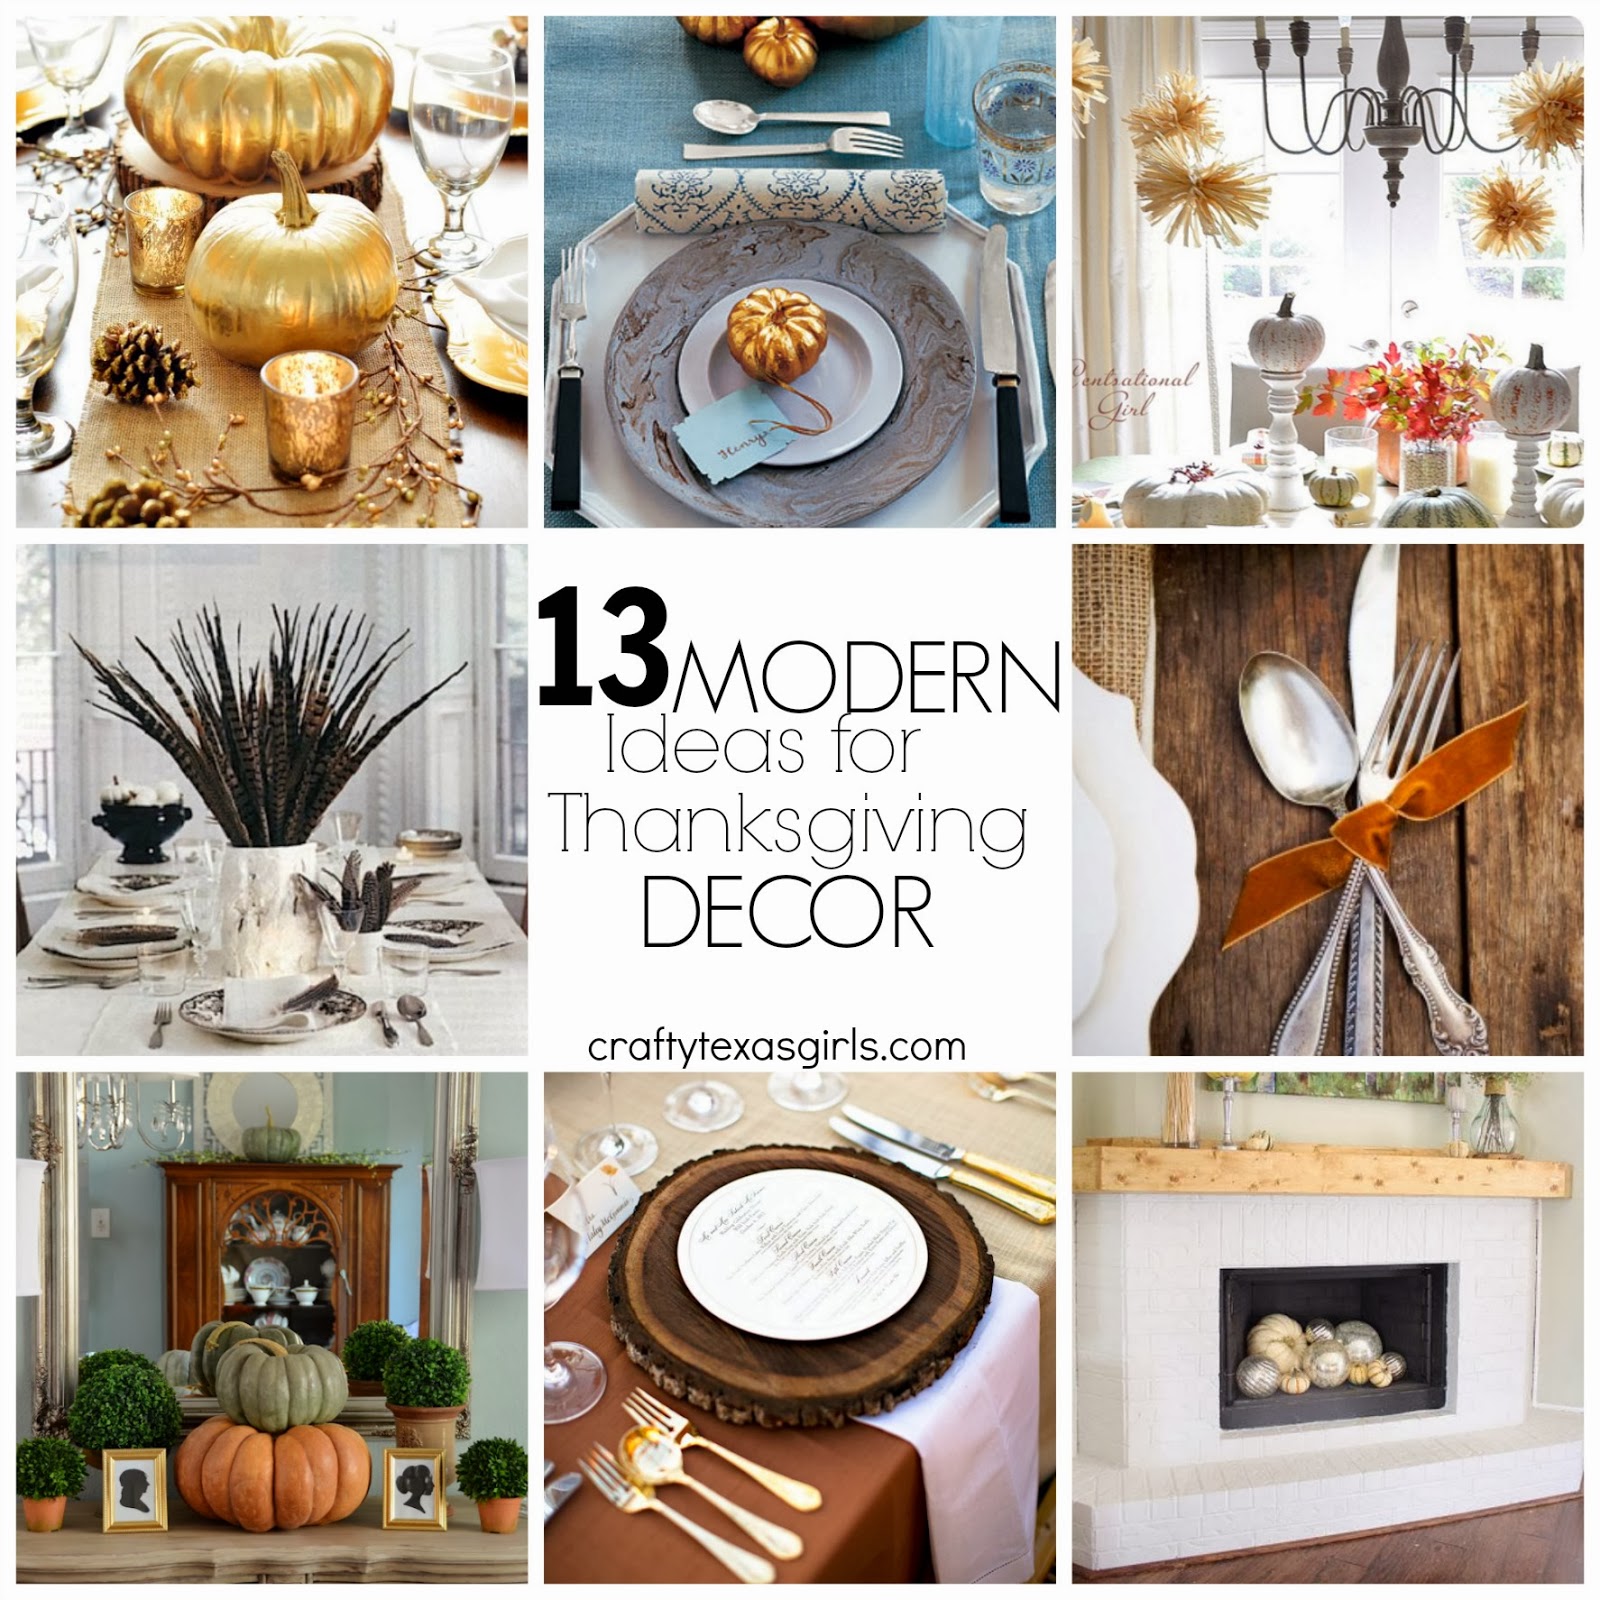 Minimalist Contemporary Thanksgiving Decor for Large Space